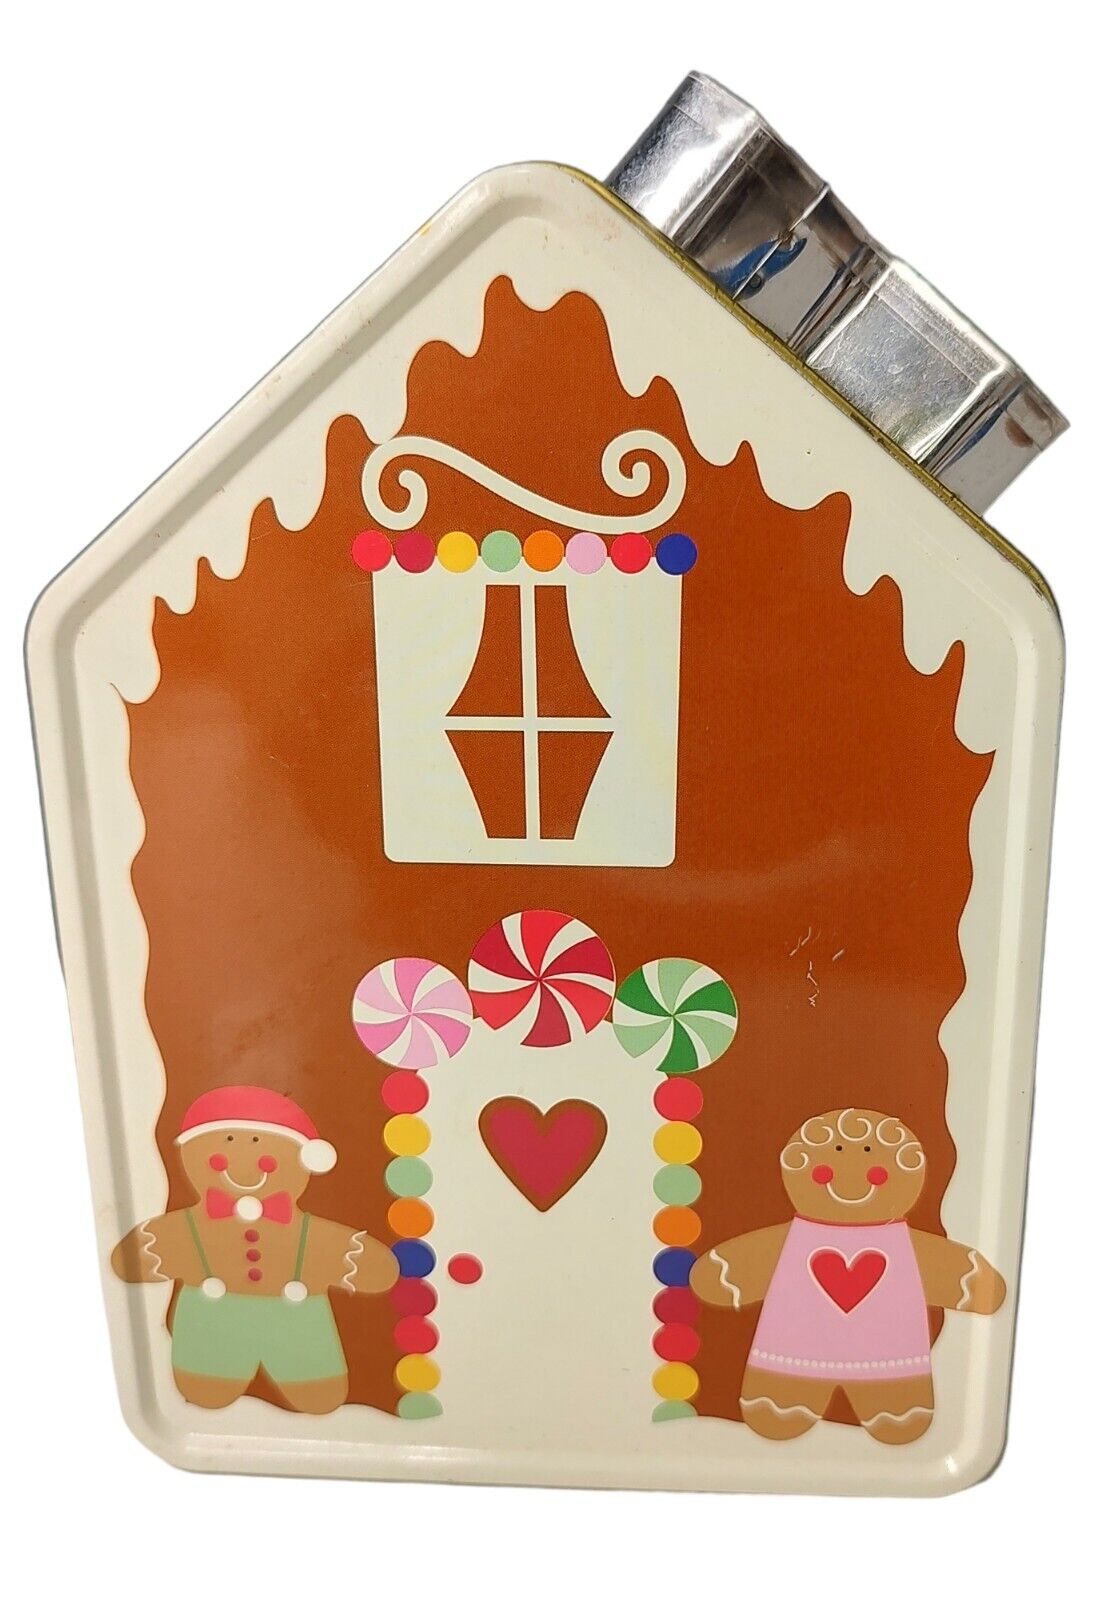 Home For The Holidays Gingerbread House Tin with Cookie Cutter and Recipe 7 in